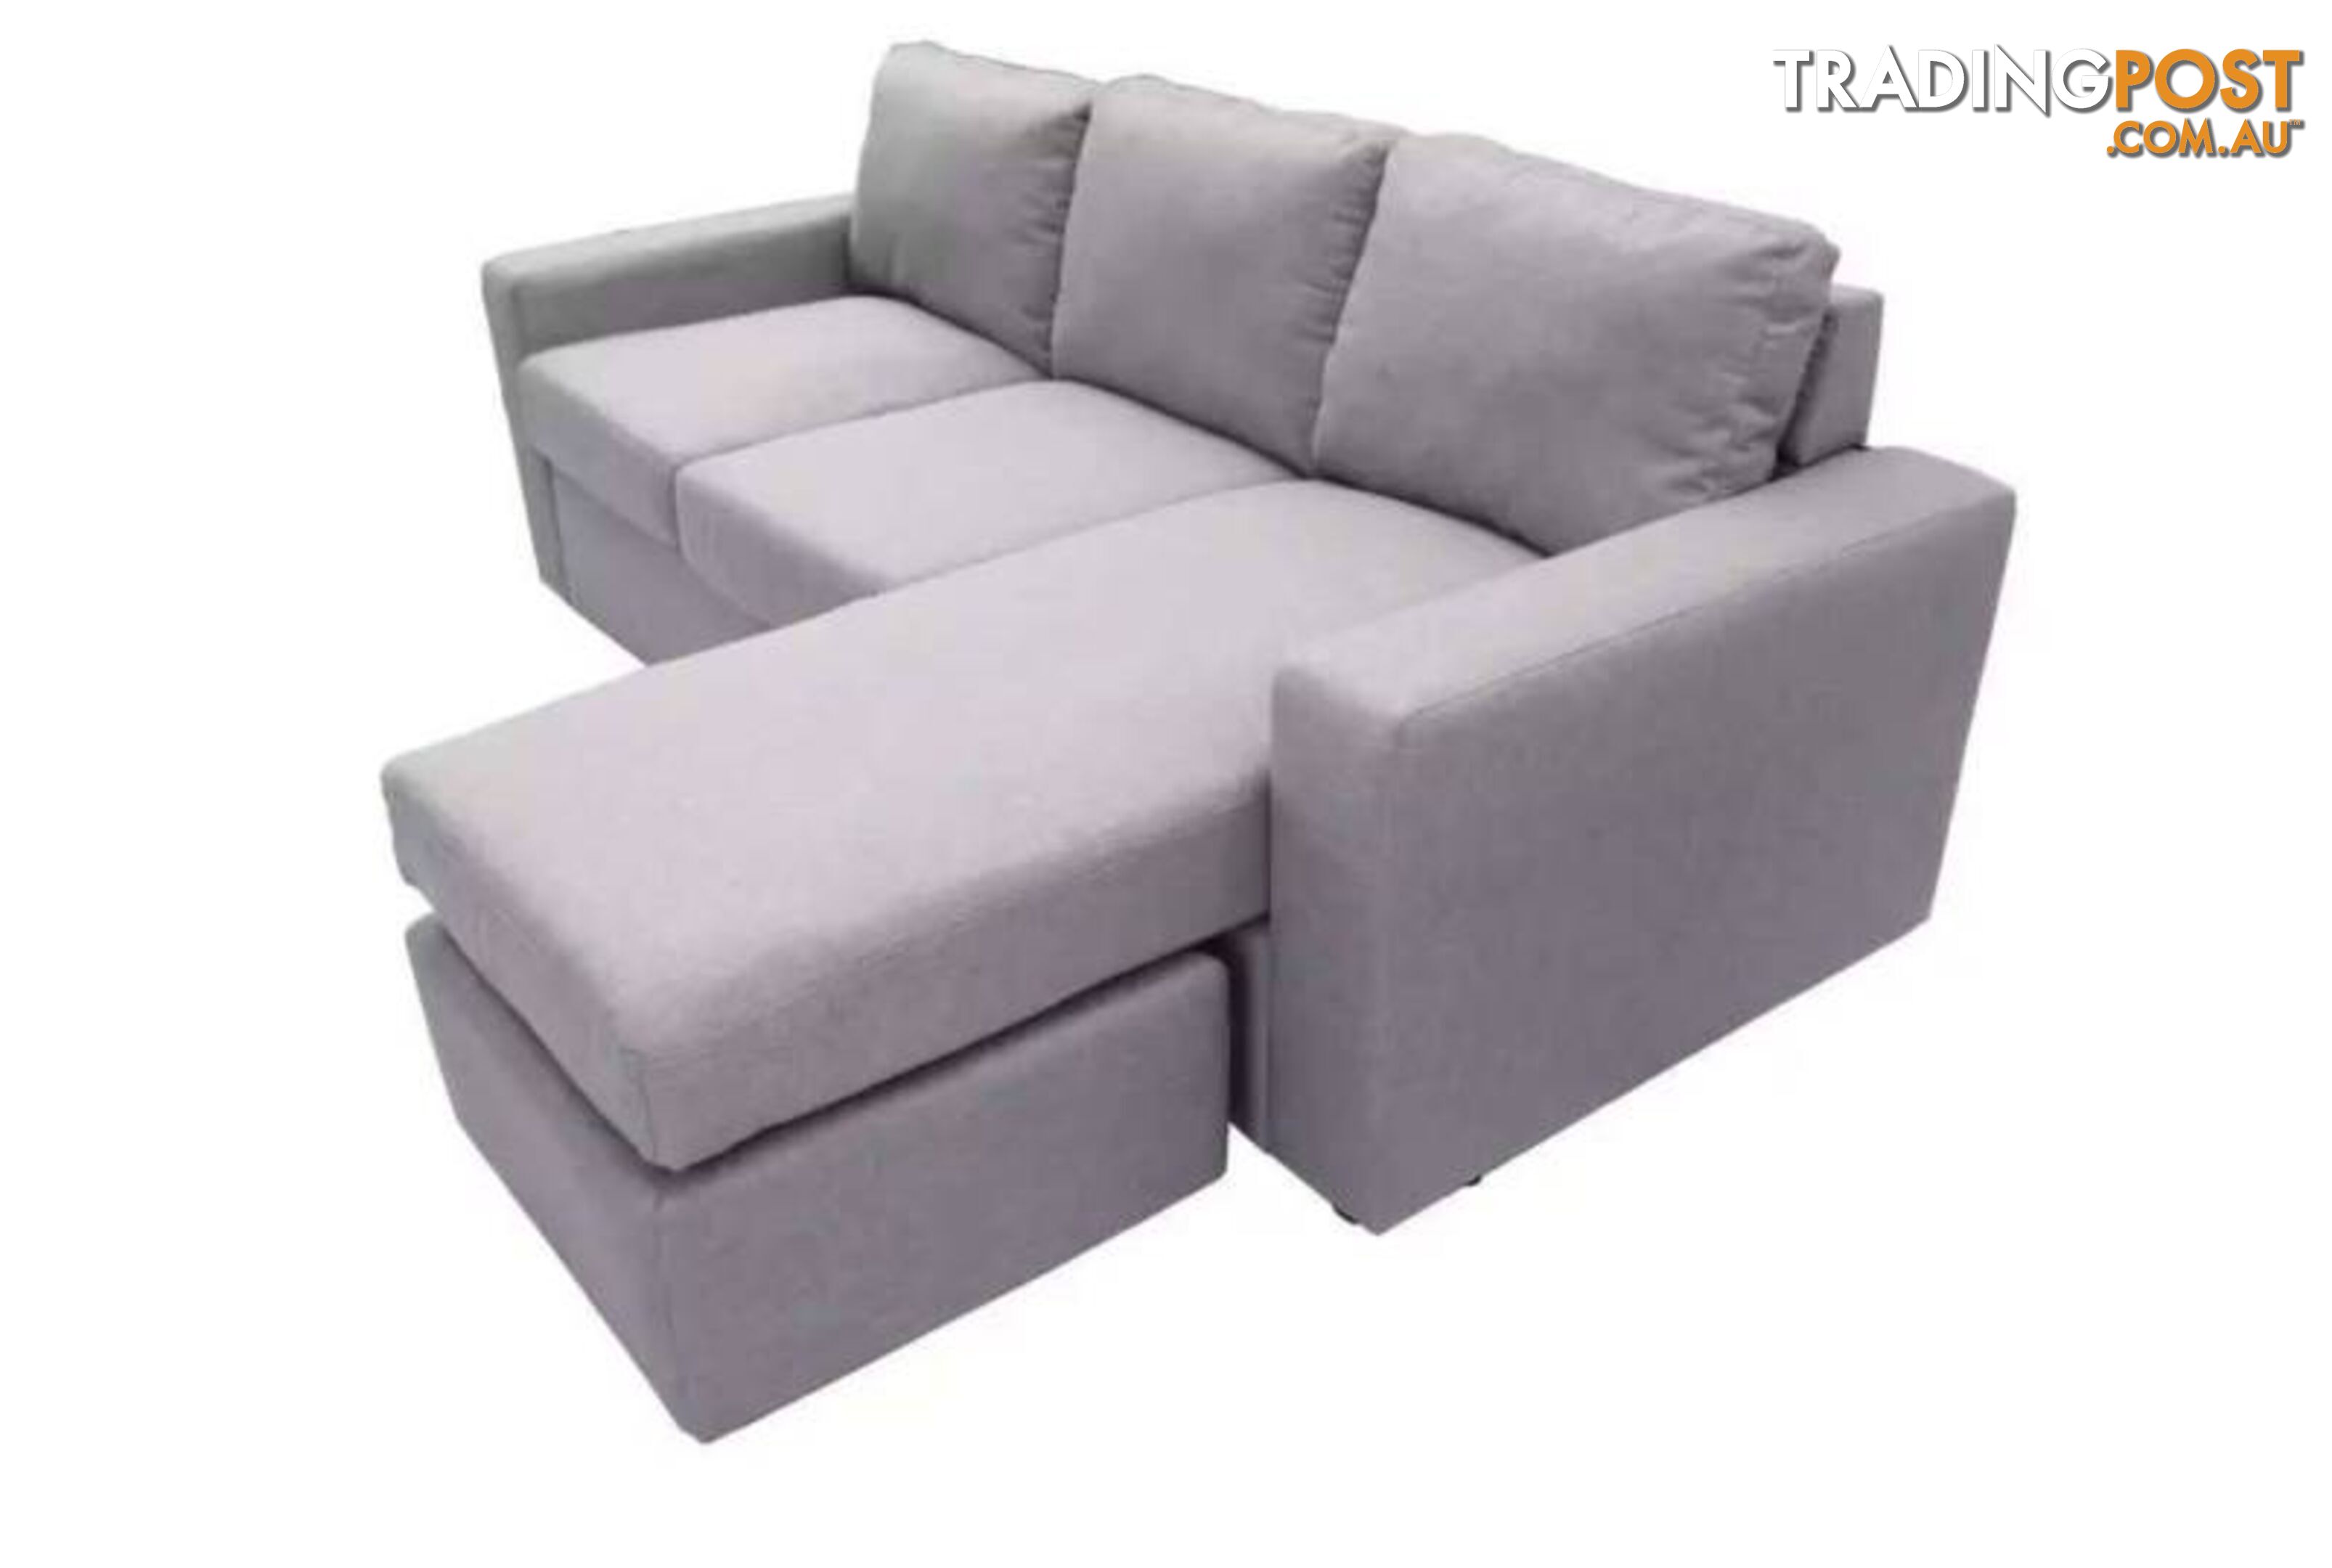 Brand New Fabric Sofa with chaise/ottoman Beige/Grey colour